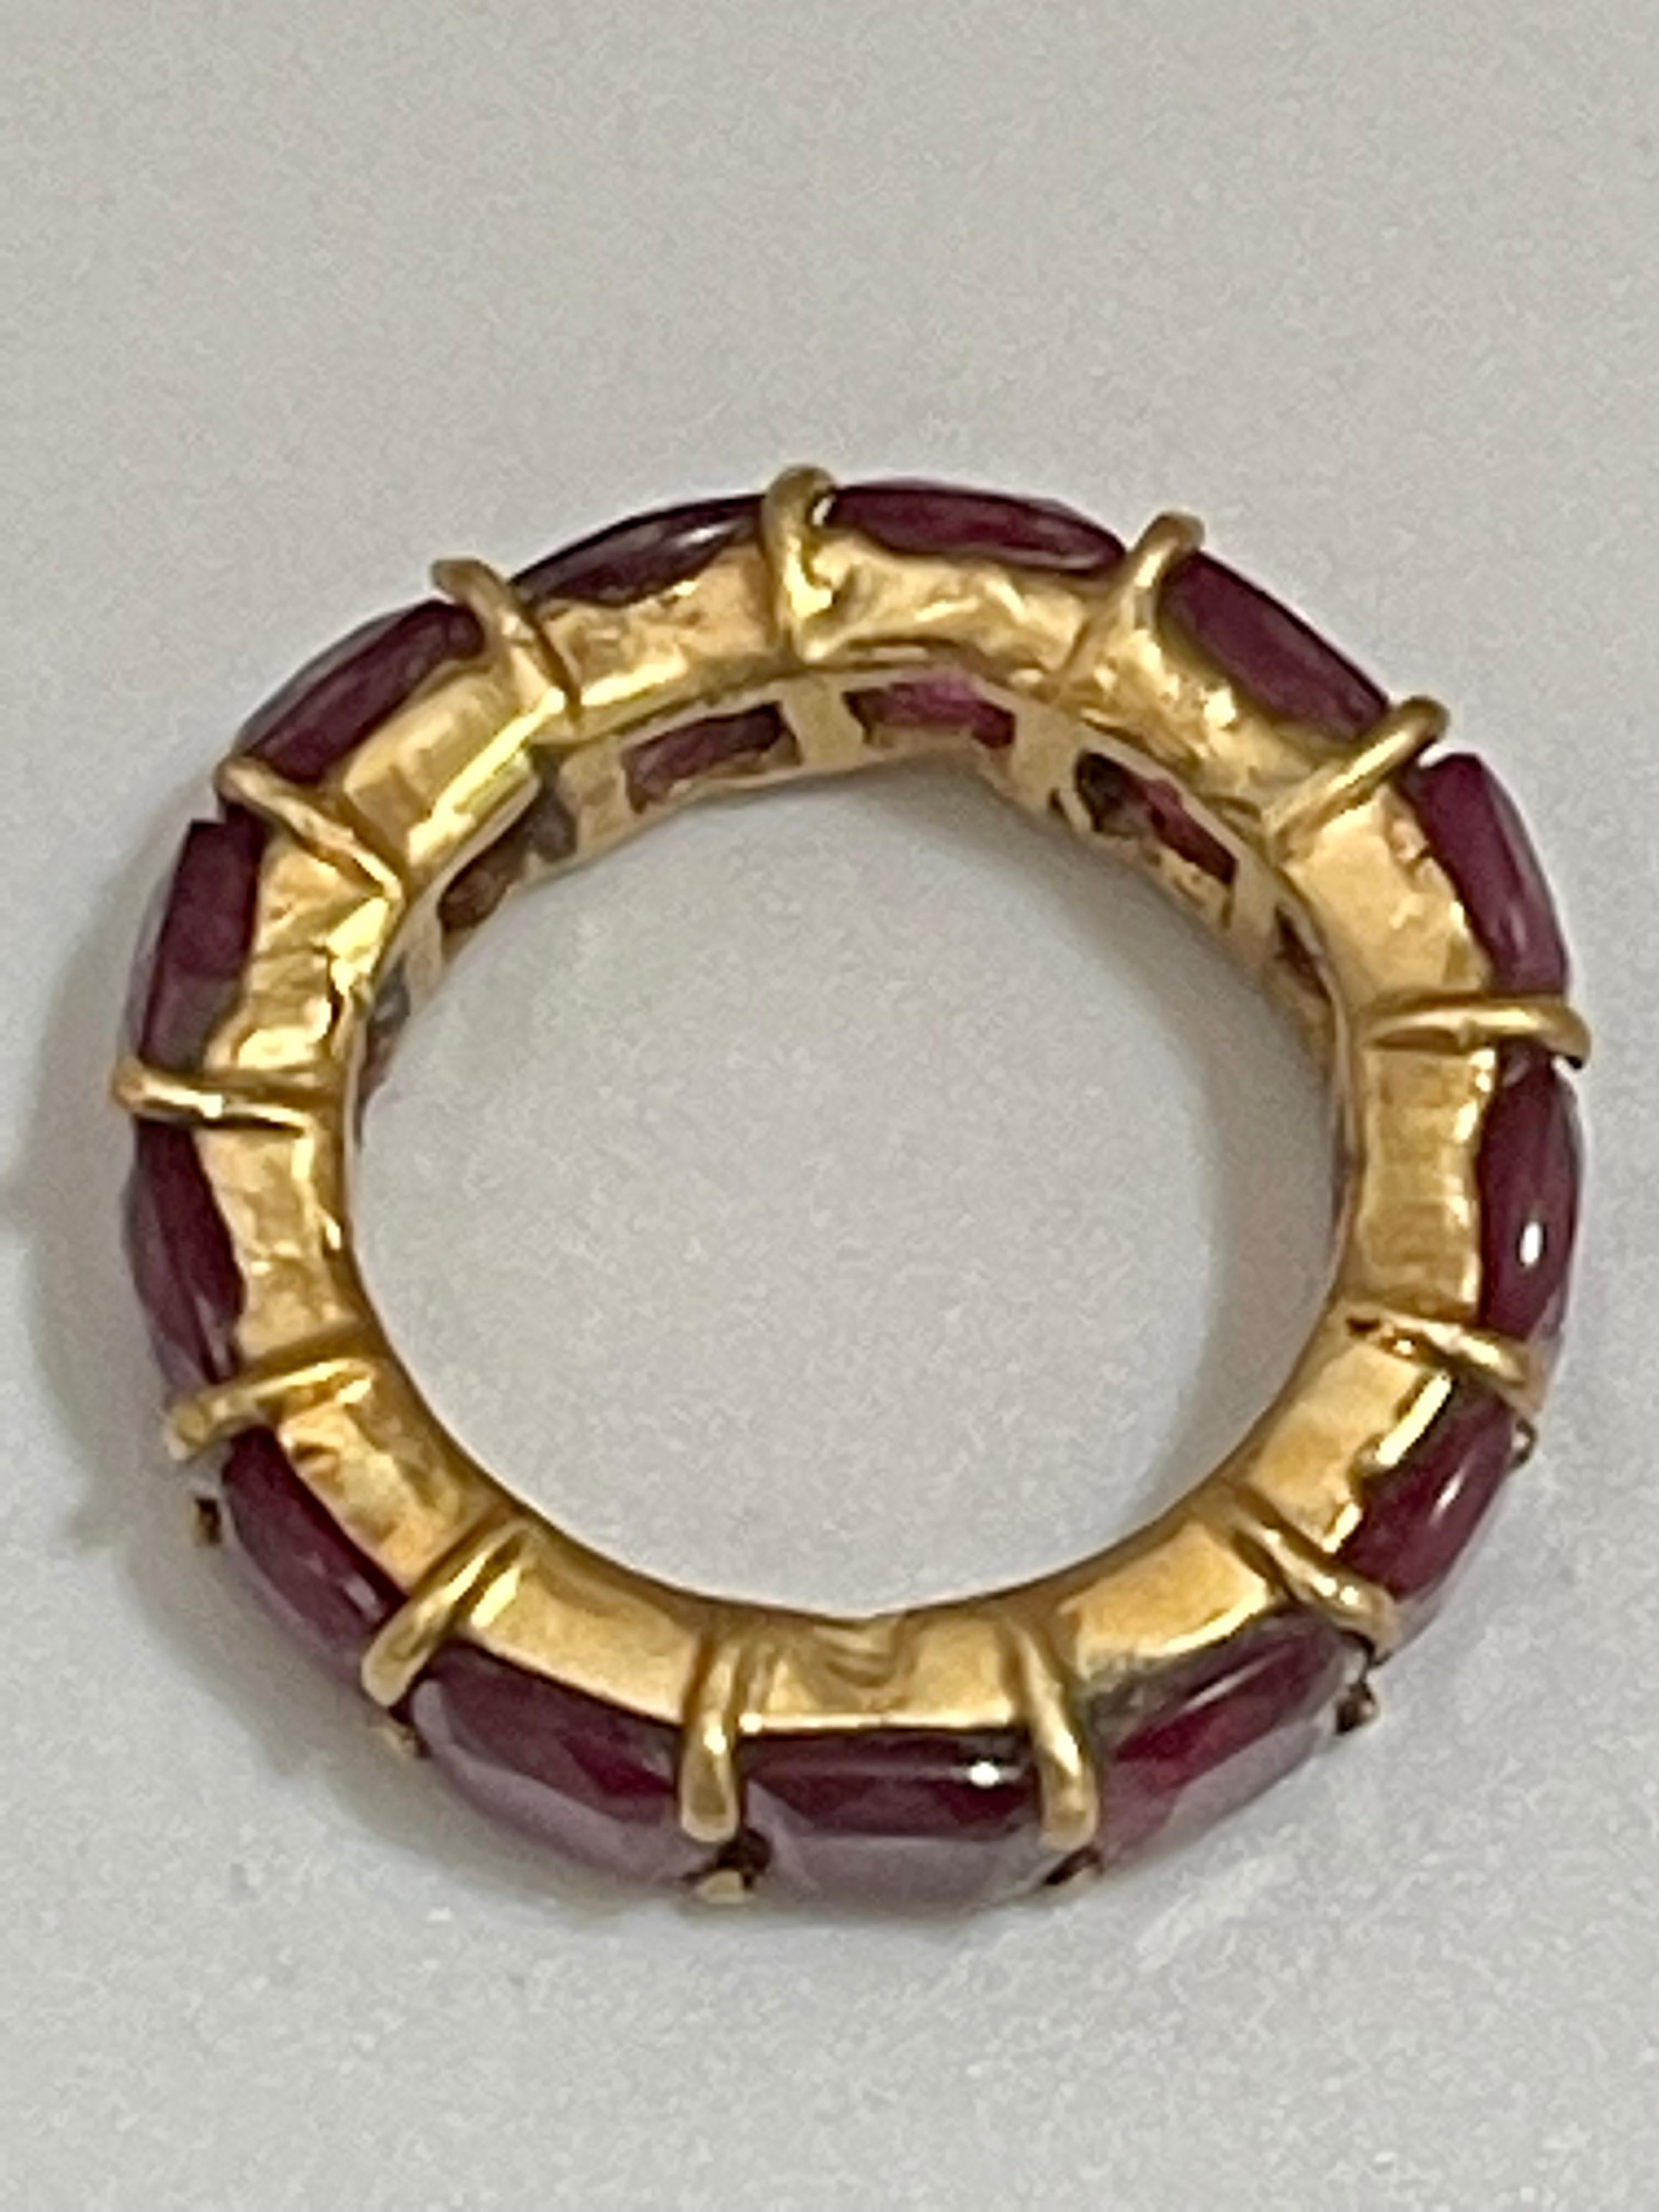 Cabochon 1 Ct Each Cushion Shape Treated Ruby 13 Ct Anniversary Eternity Band/Ring 18KYG For Sale